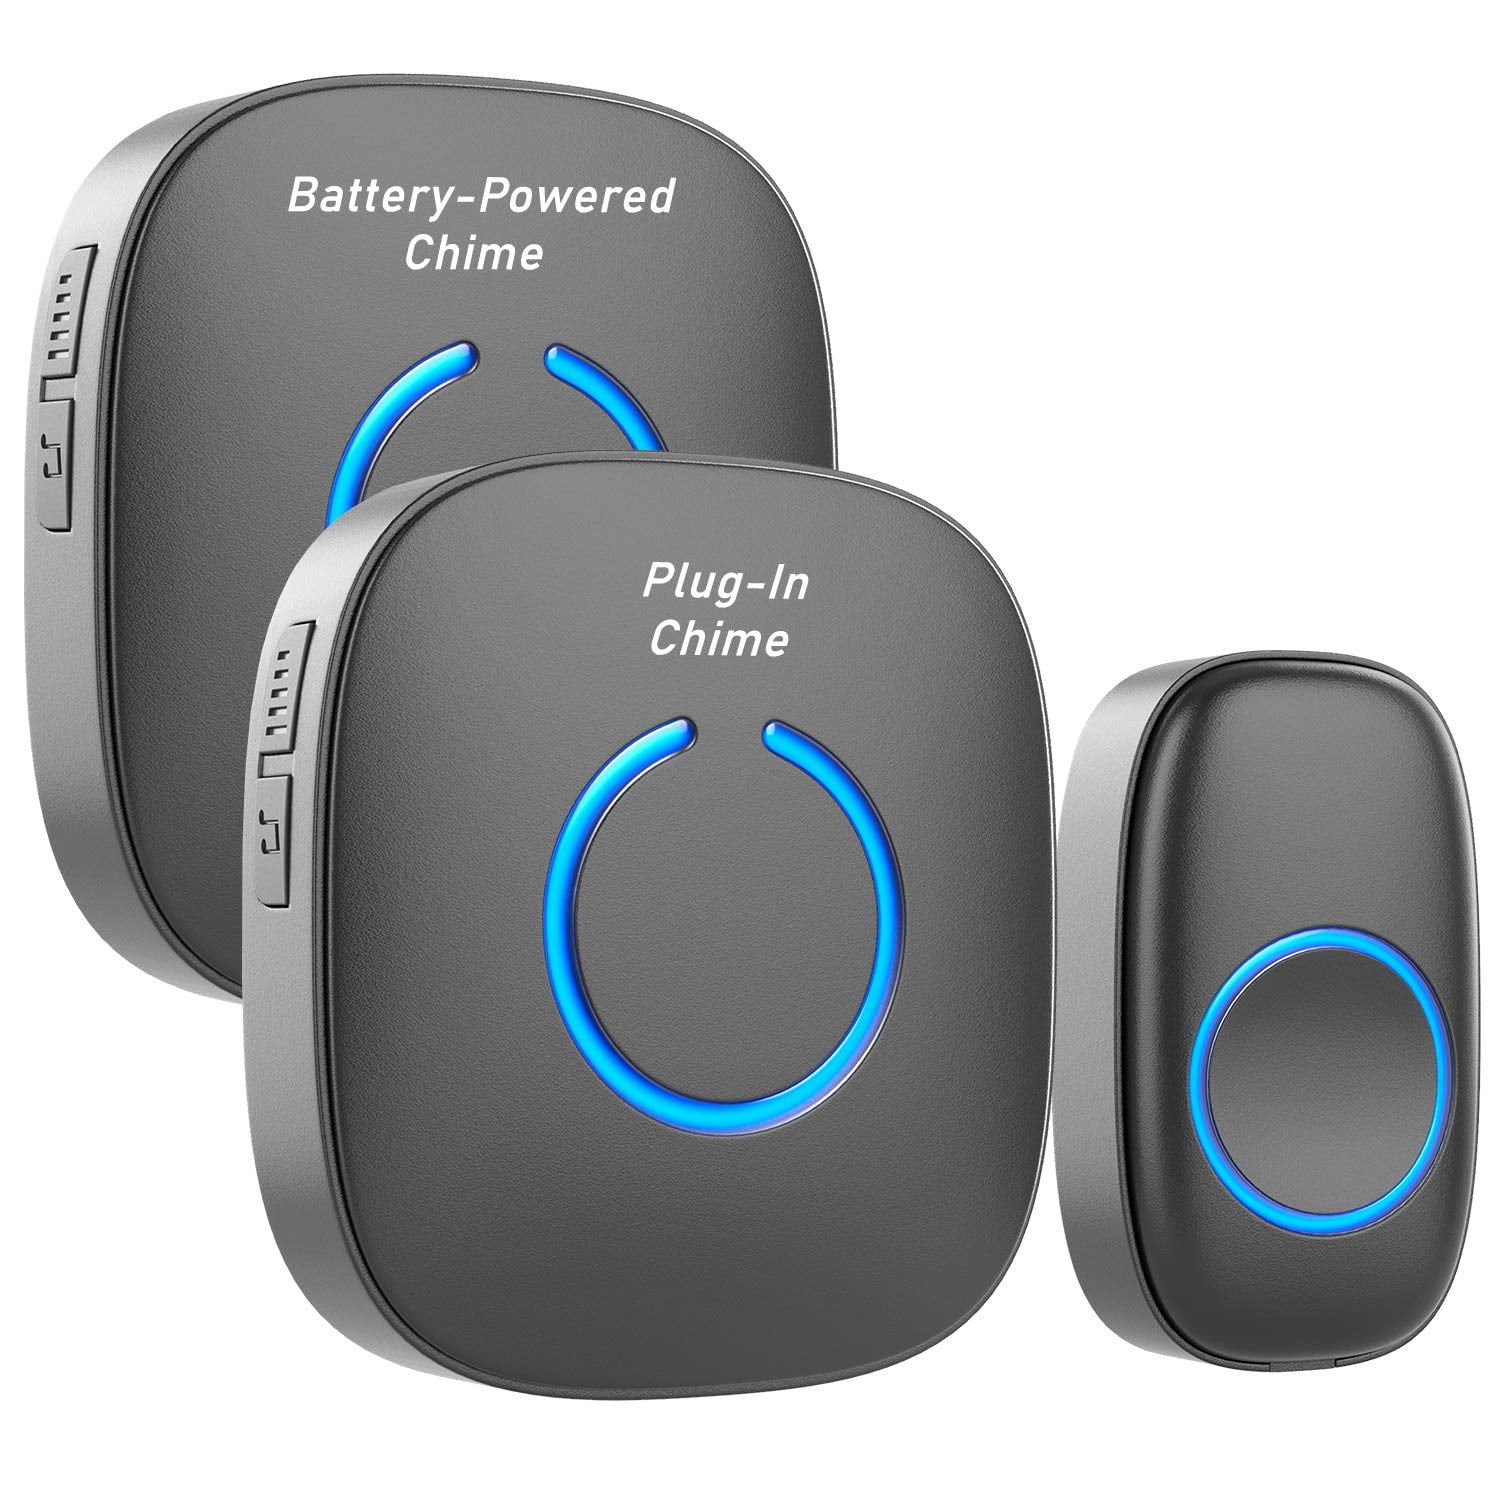 2016 STARPOINT Extra Add-On Remote Transmitter Button for The STARPOINT Expandable Wireless Multi-Unit Long Range Doorbell Chime Alert System Scratch Resistant Matte Black Model LT